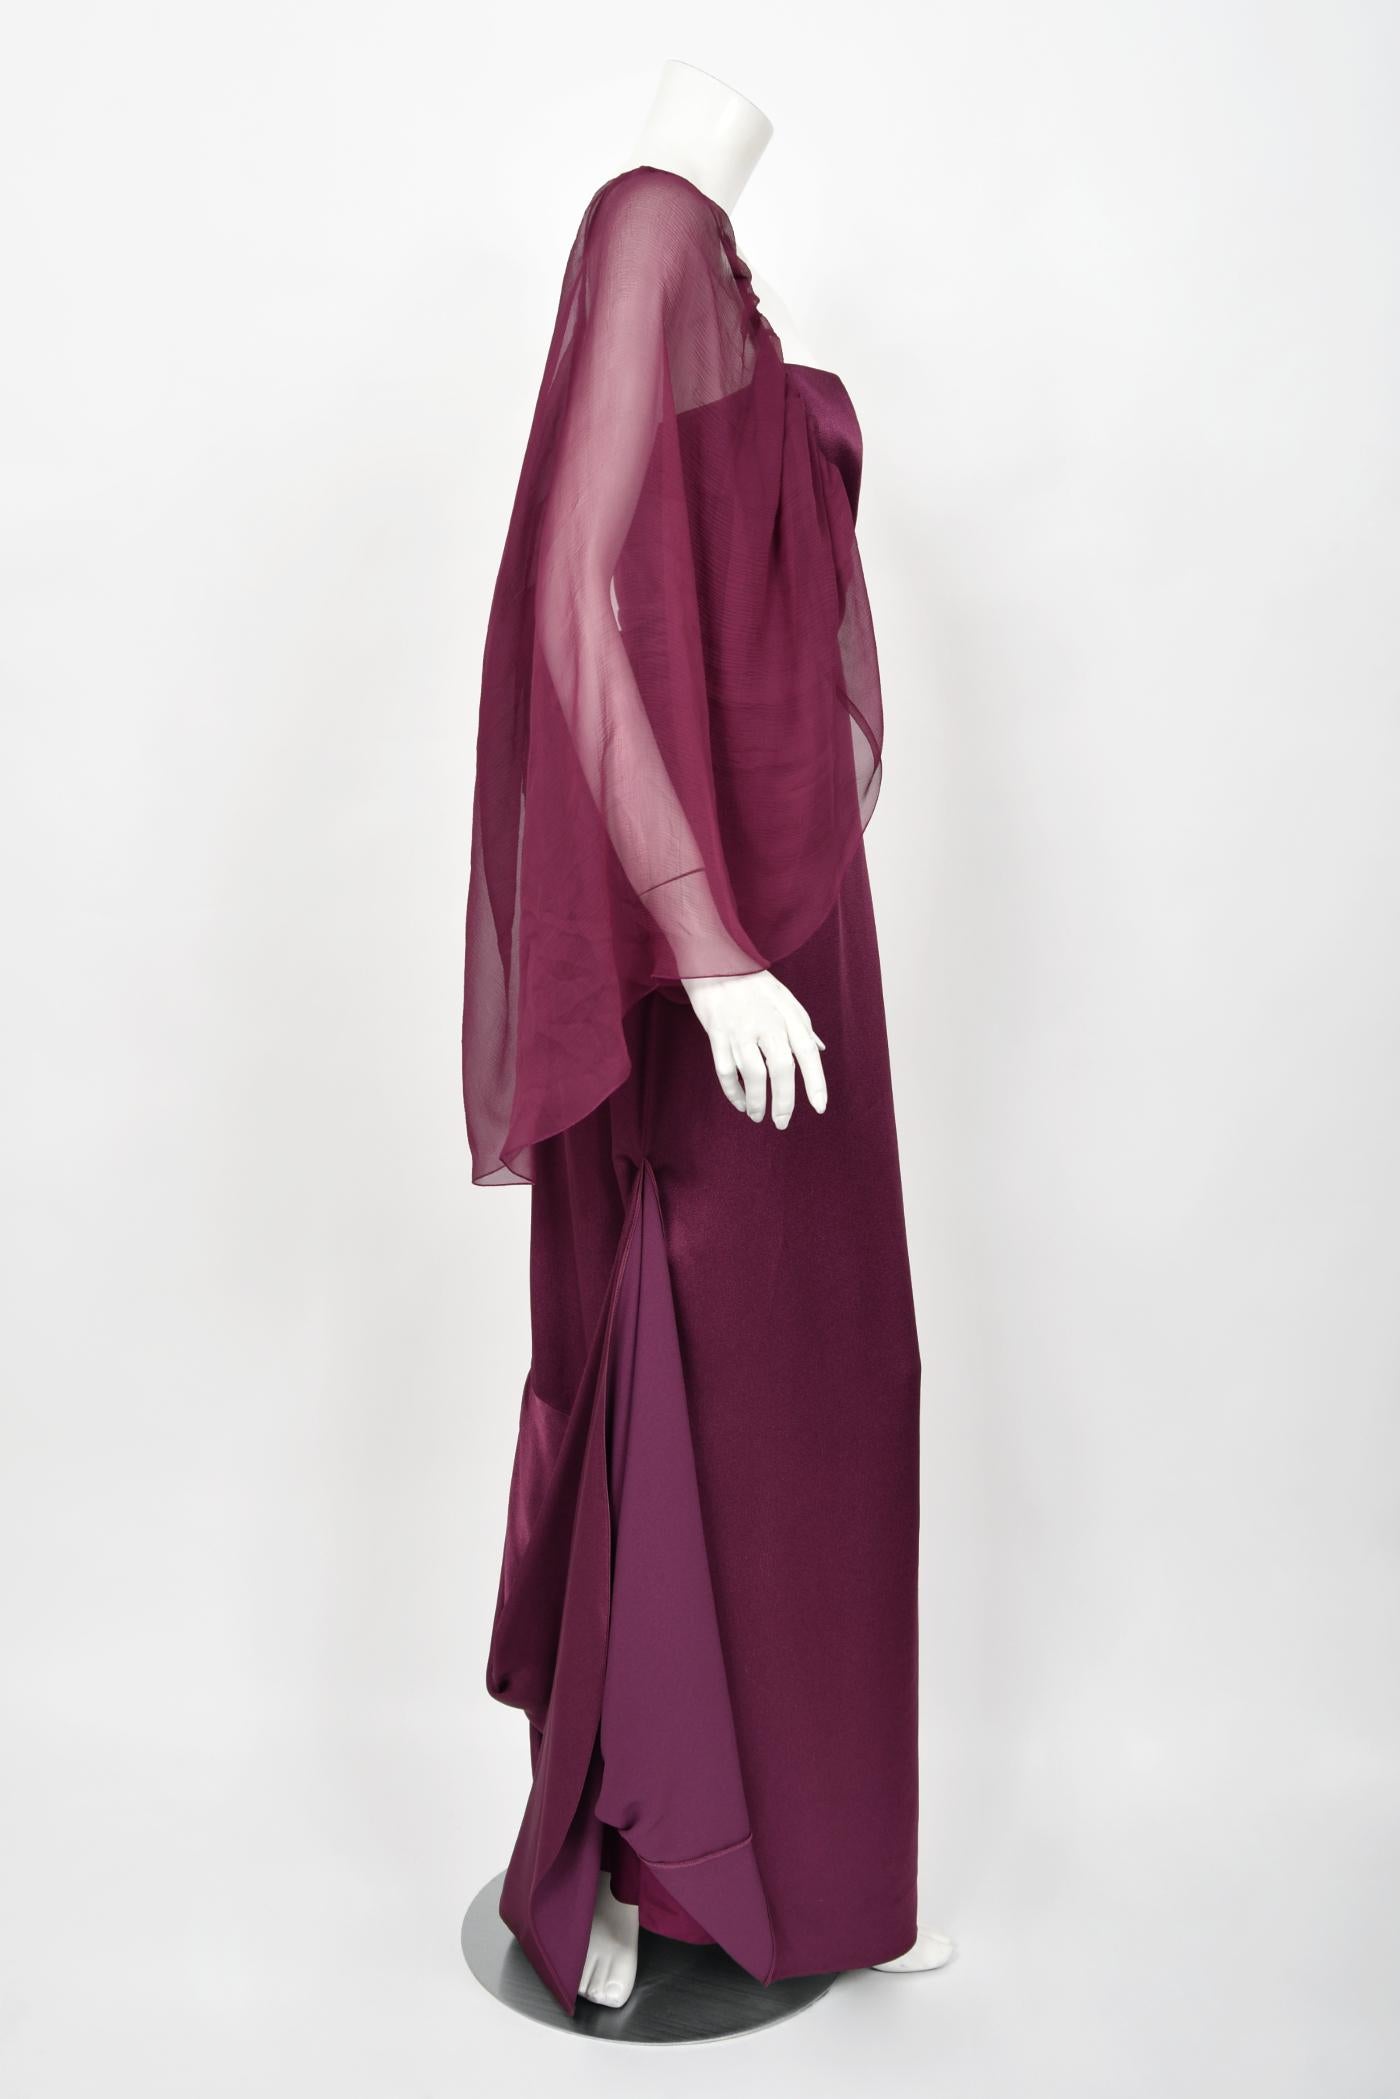 2000 Christian Dior by Galliano Purple Silk Sheer-Sleeve Asymmetric Draped Gown For Sale 4